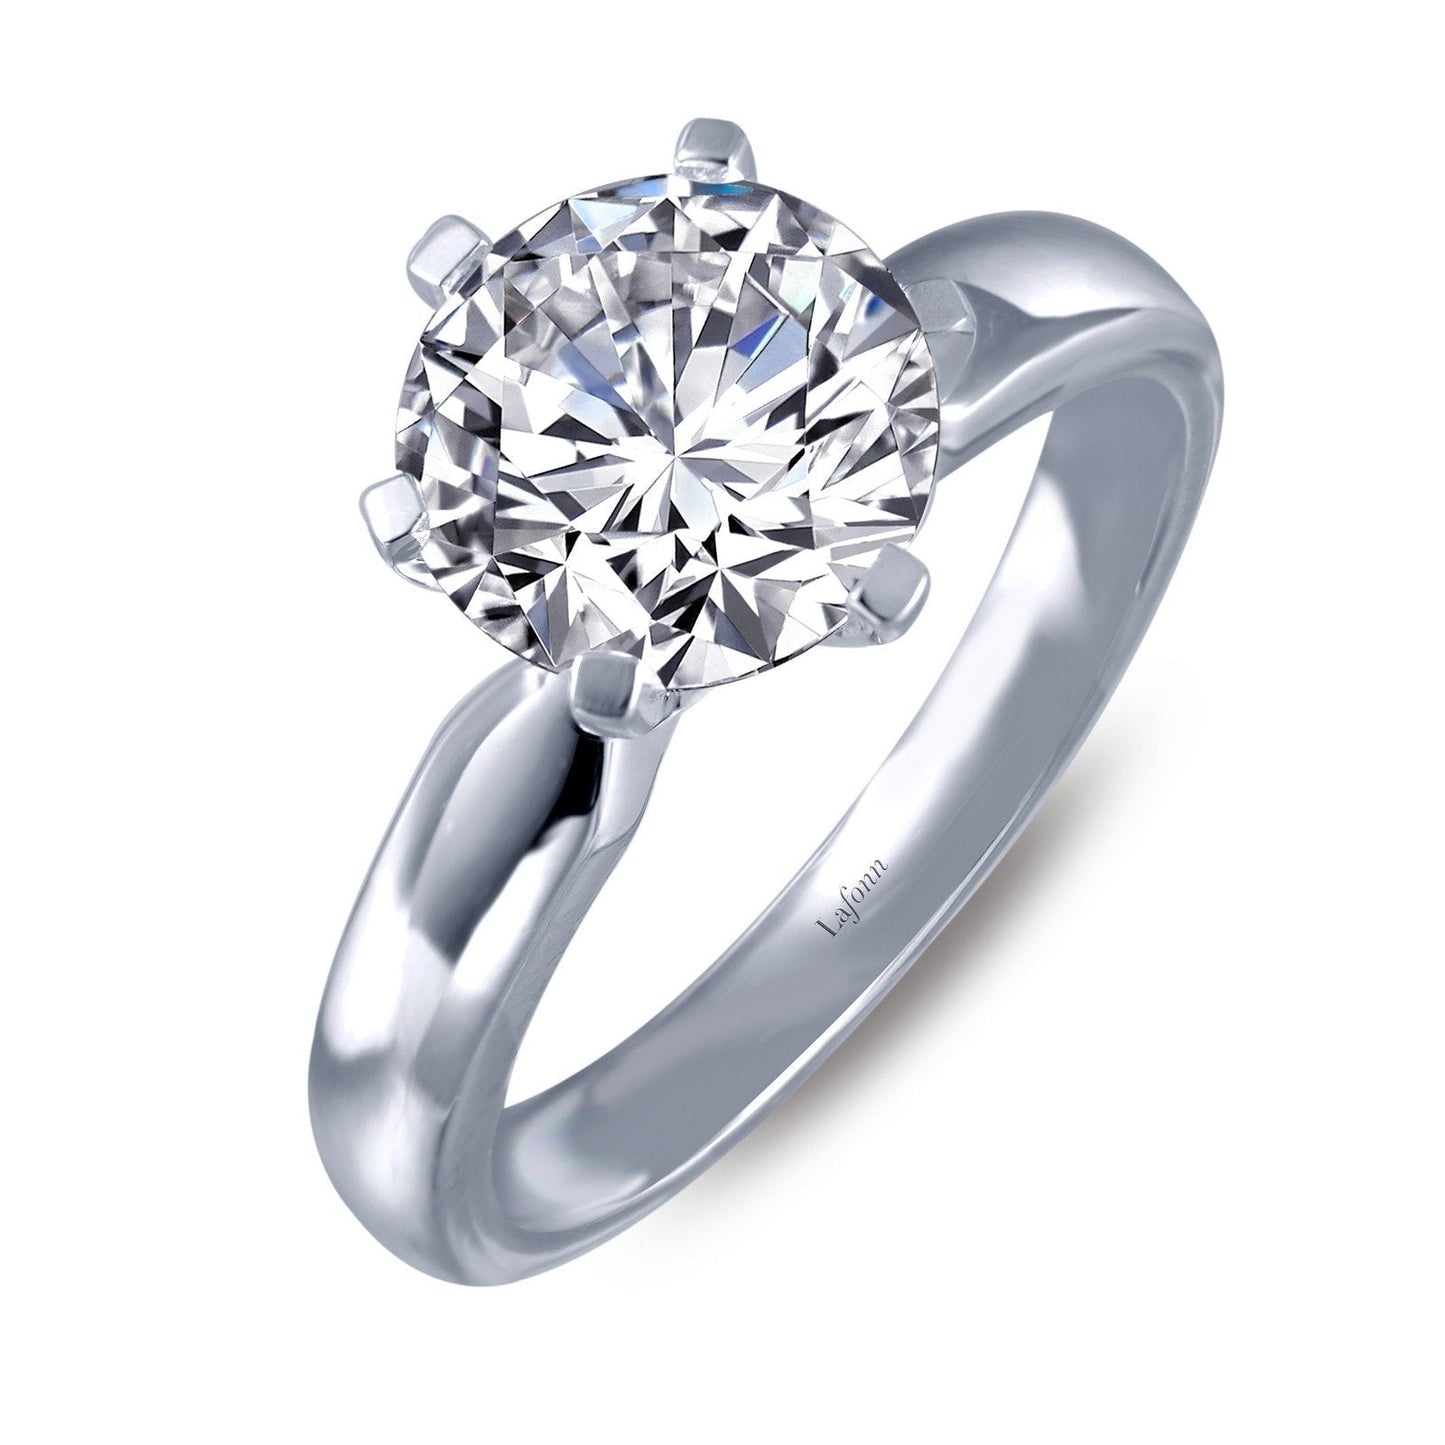 Lafonn 2.04 CTW Solitaire Ring Simulated Diamond RINGS Size 8 Platinum 2.04 CTS 